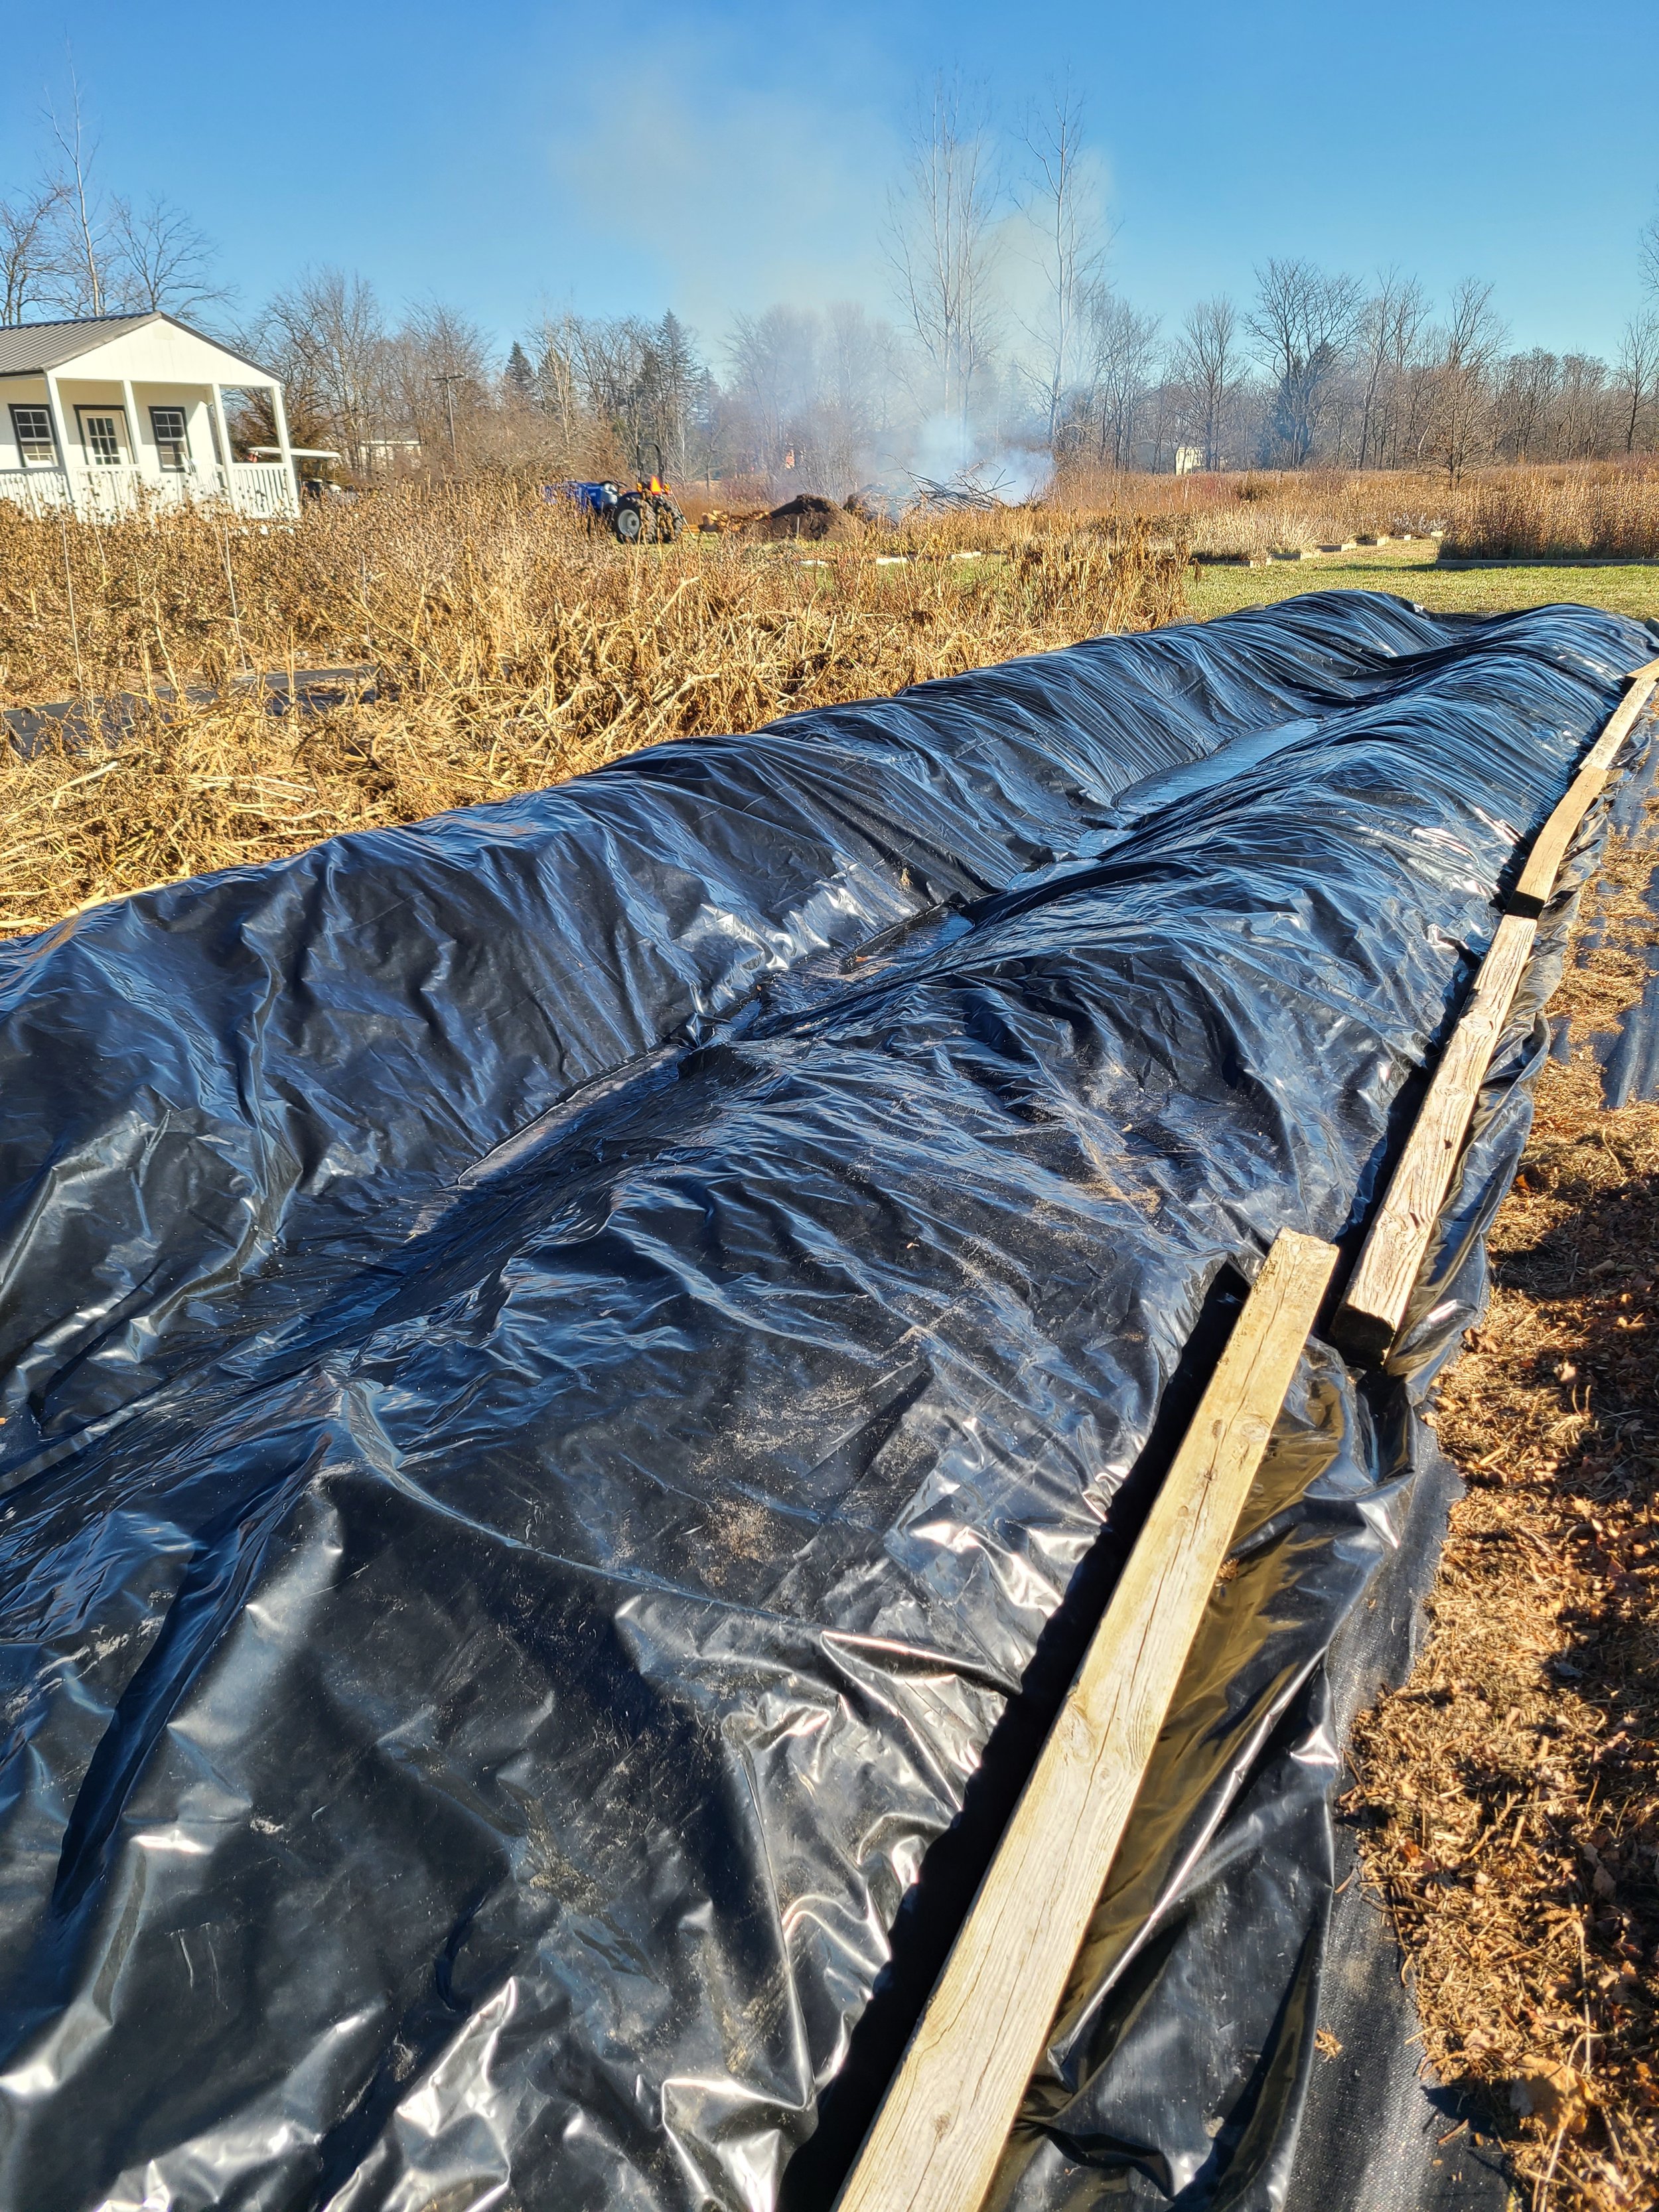  Covering Dahlias with silage tarp in order to overwinter them! 